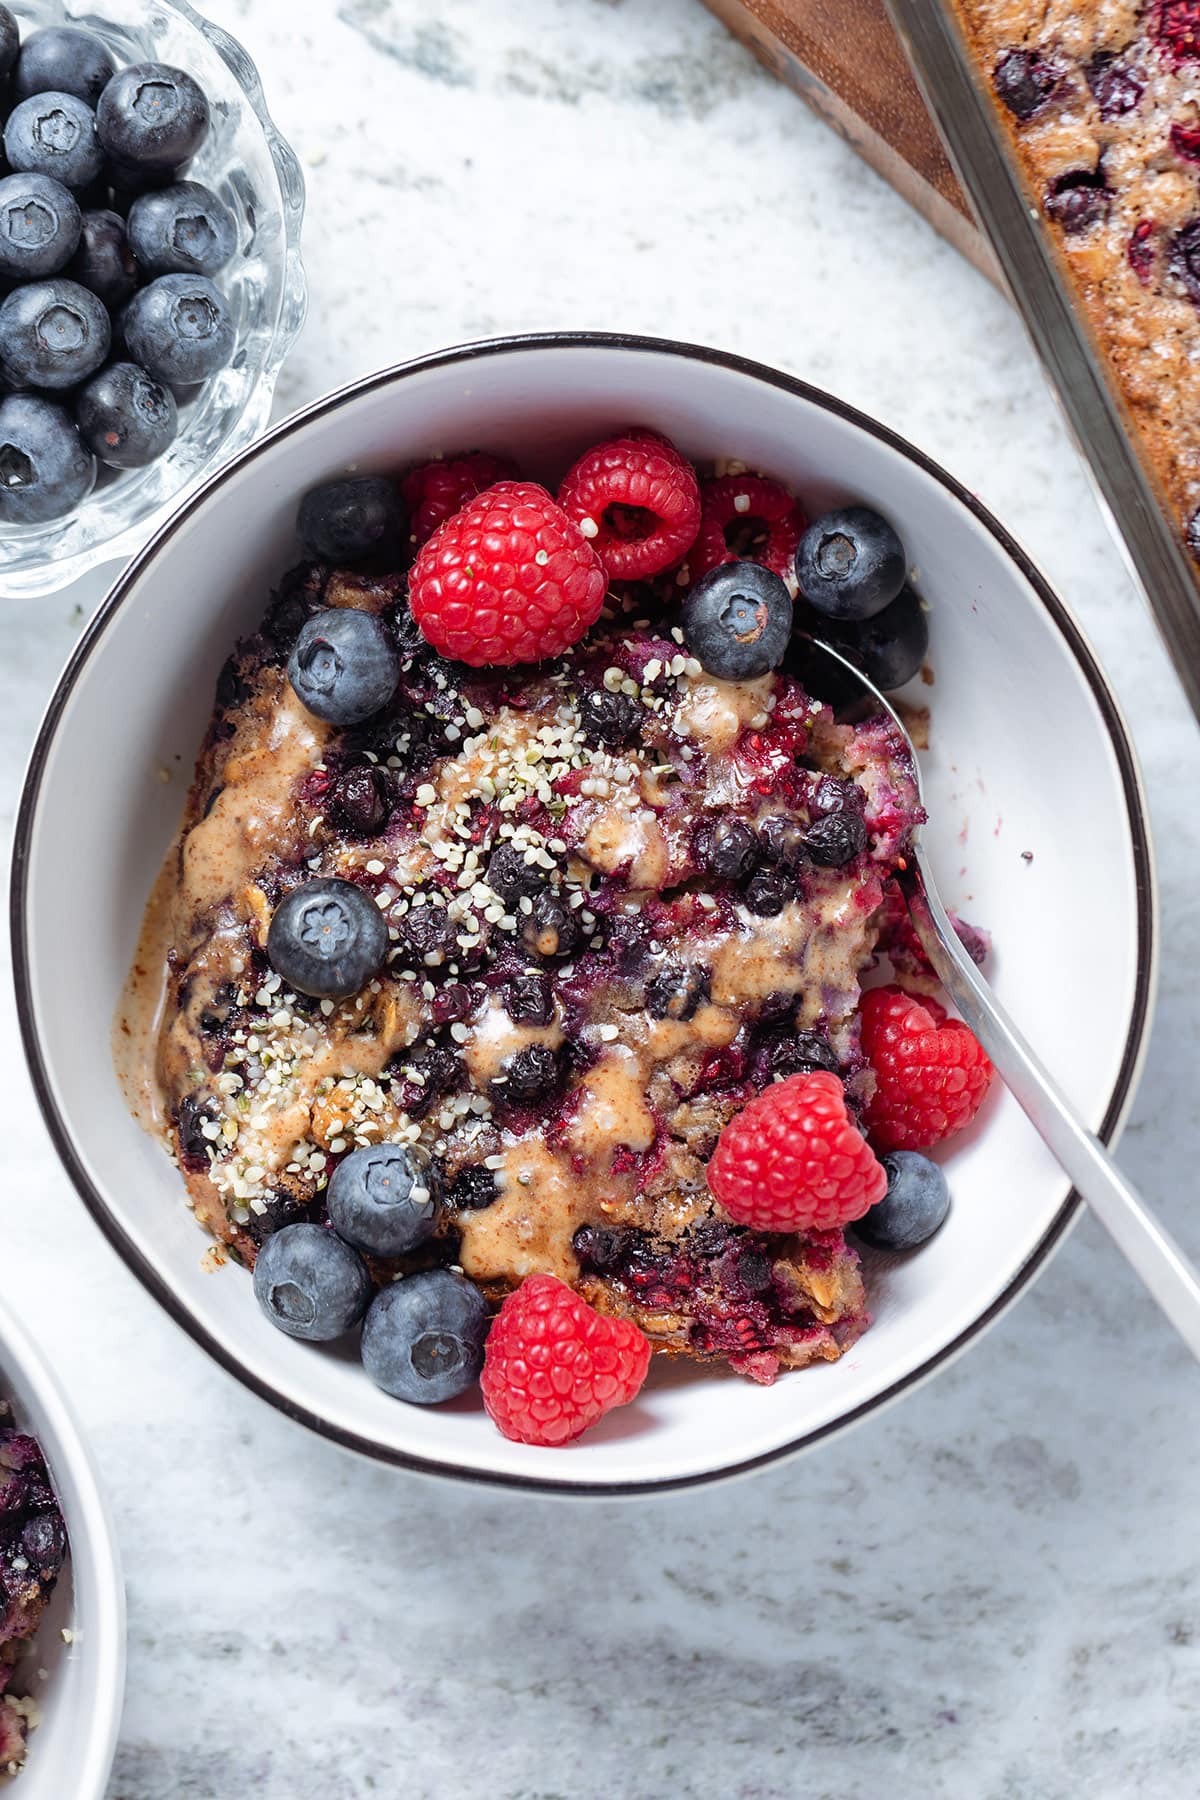 A slice of blueberry baked oatmeal in a white bowl with black rim garnished with berries and almond butter.